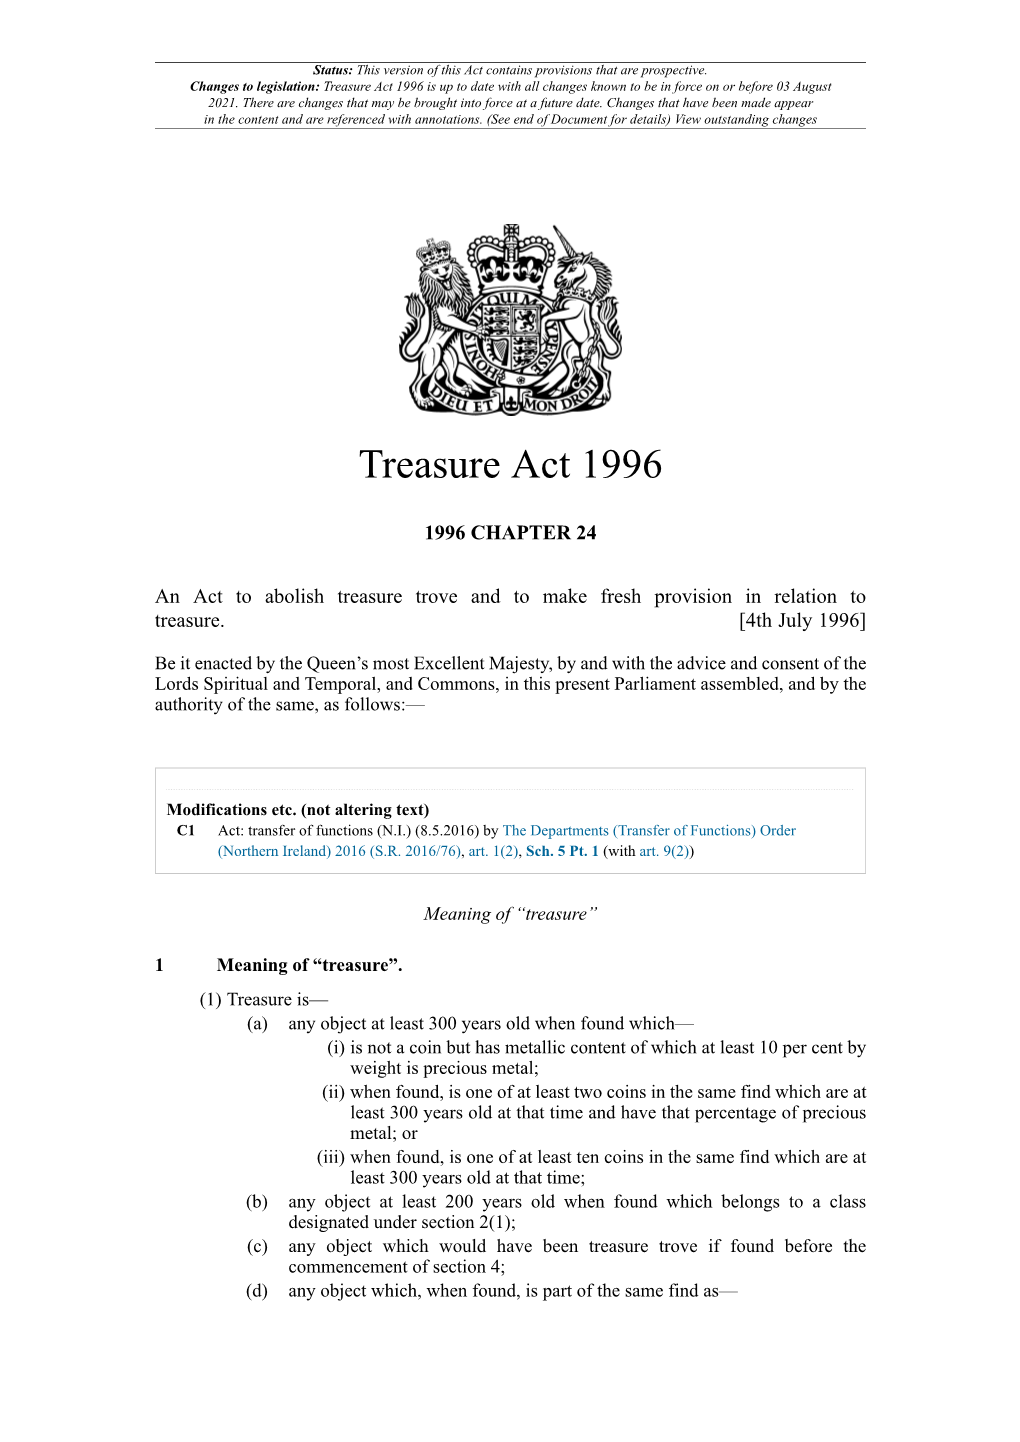 Treasure Act 1996 Is up to Date with All Changes Known to Be in Force on Or Before 03 August 2021